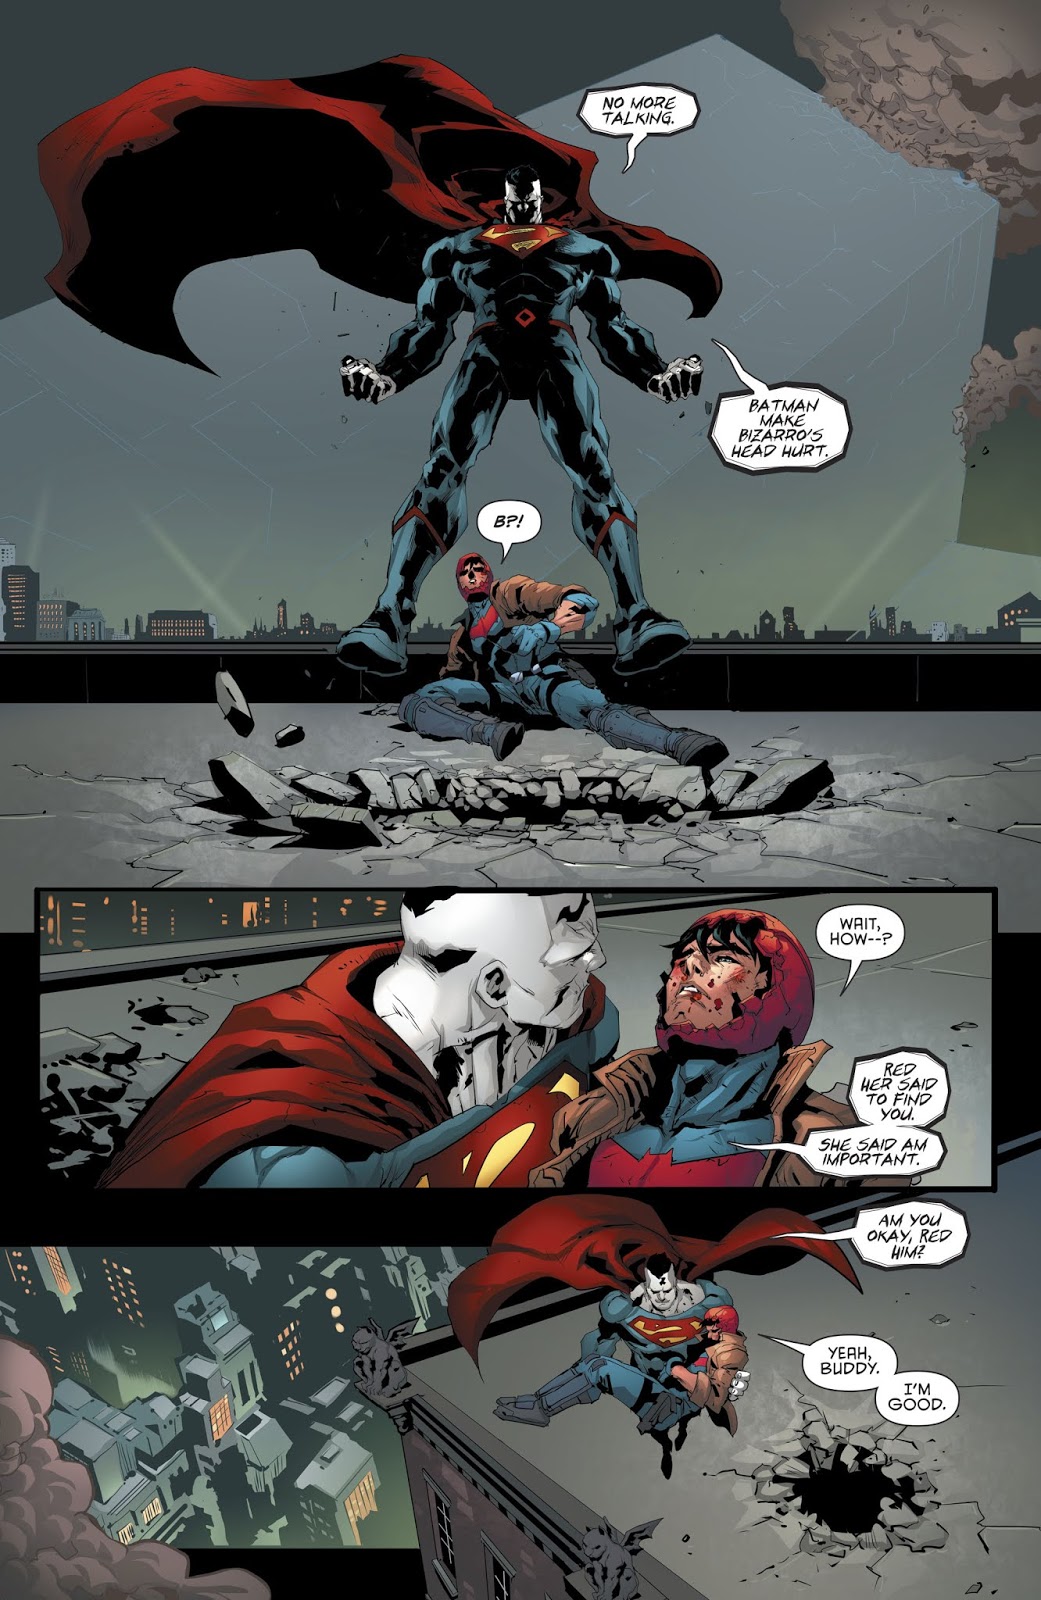 Red Hood VS Batman (Red Hood and the Outlaws Vol. 2 #25)